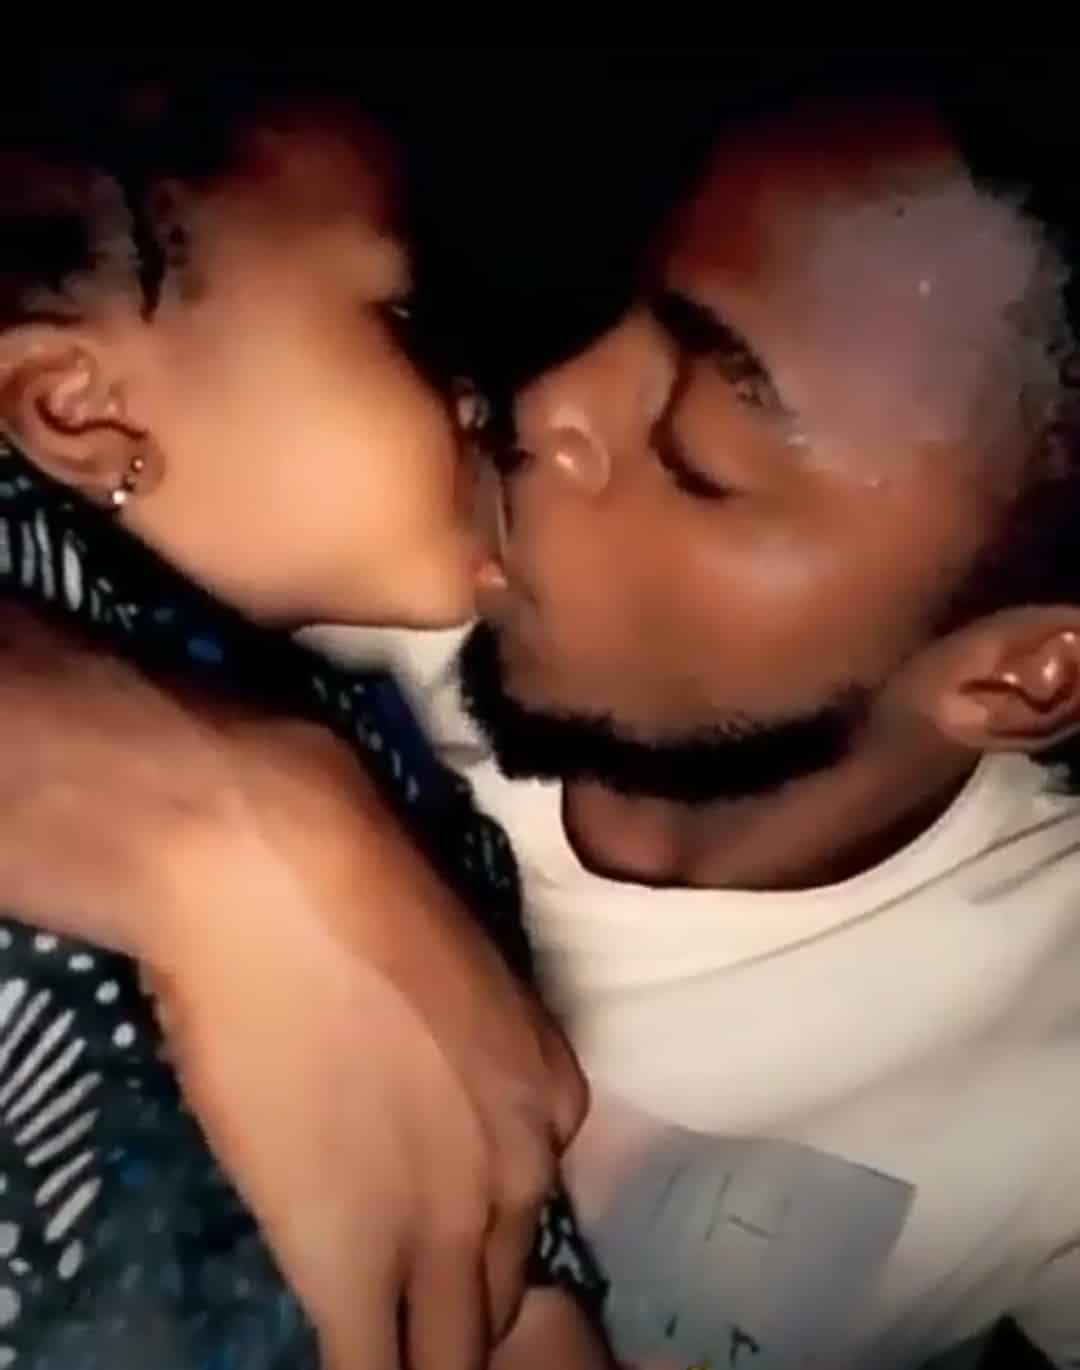 Police Launches Search For Man Who Kissed A Little Girl In Viral Video